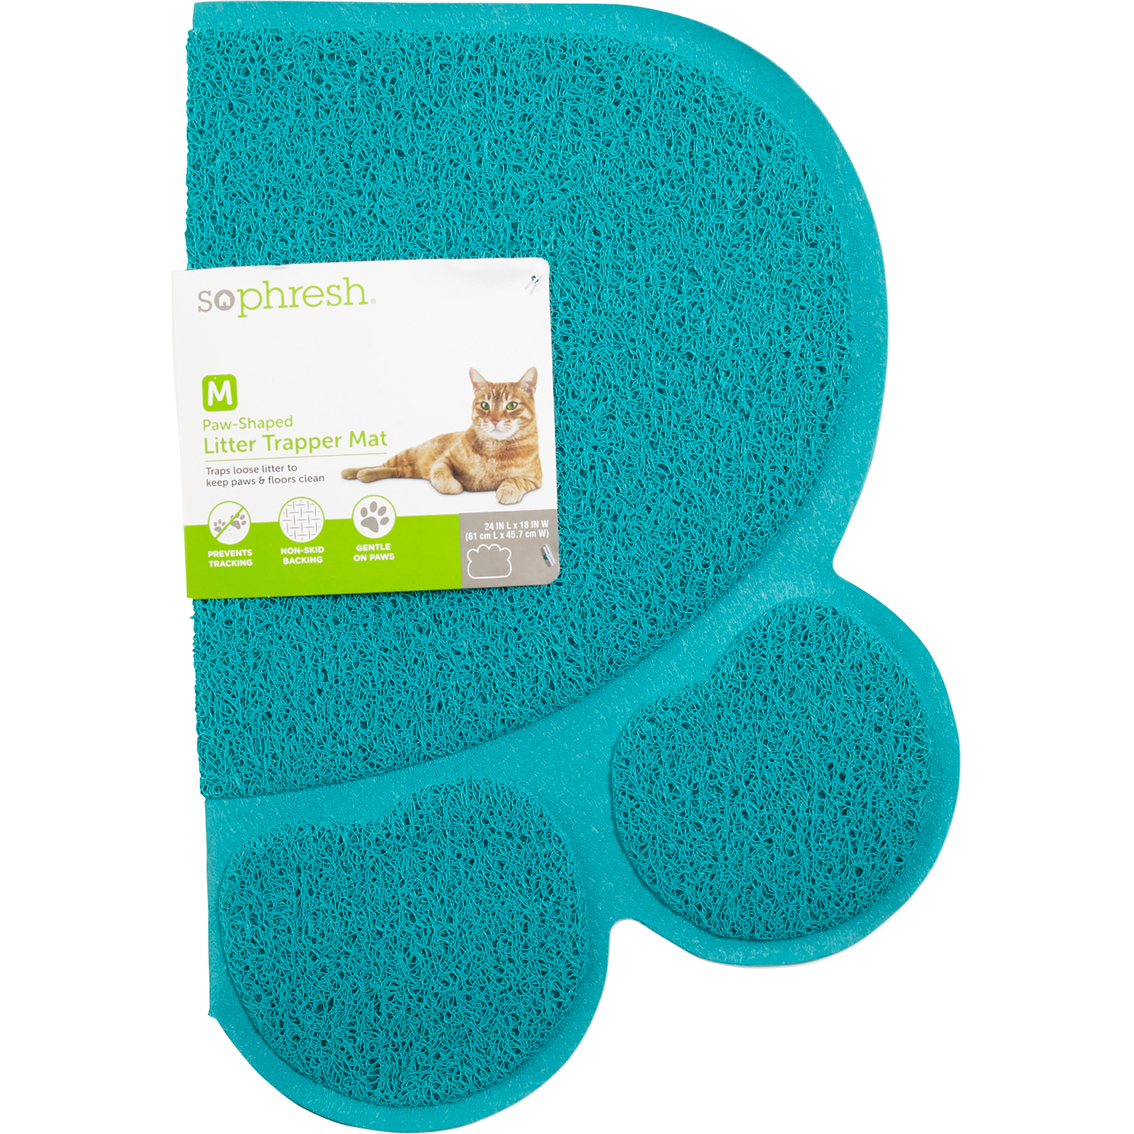 So Phresh Blue Paw Shaped Cat Litter Trapper Mat - Image 3 of 4